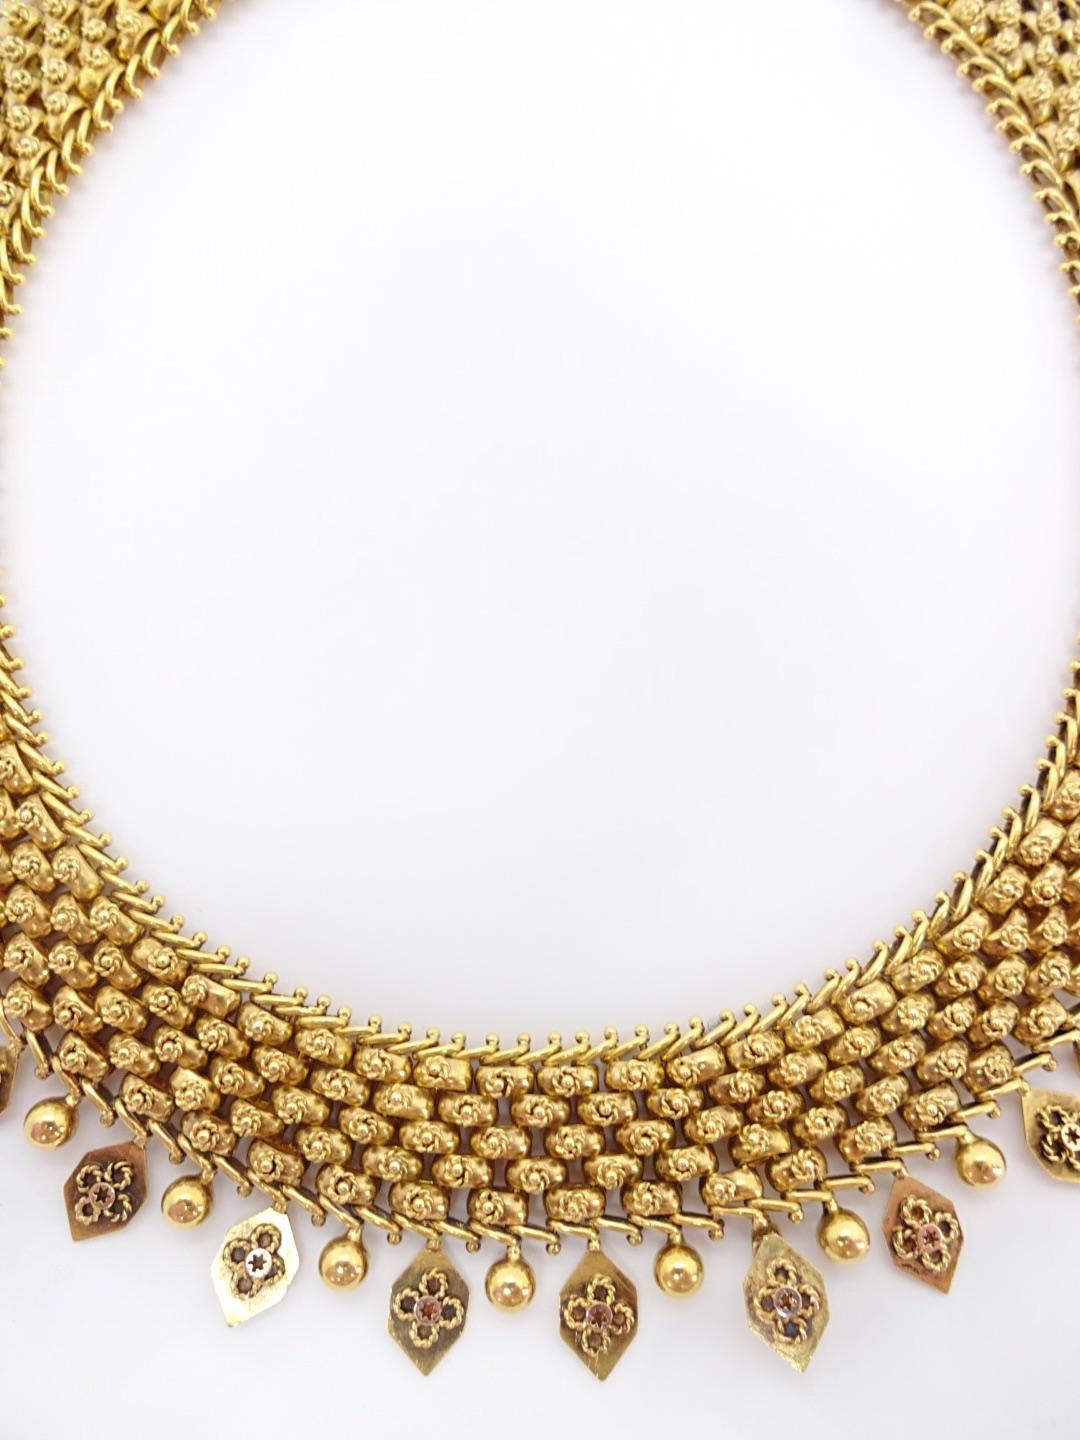 
Each gold ball that connect to form the 5 rows in the body of this collar are decorated with a tiny florette of twisted wire. Entire collar rolls very nicely in your hand or with the body, and is accented by a row of alternating detail pendants;